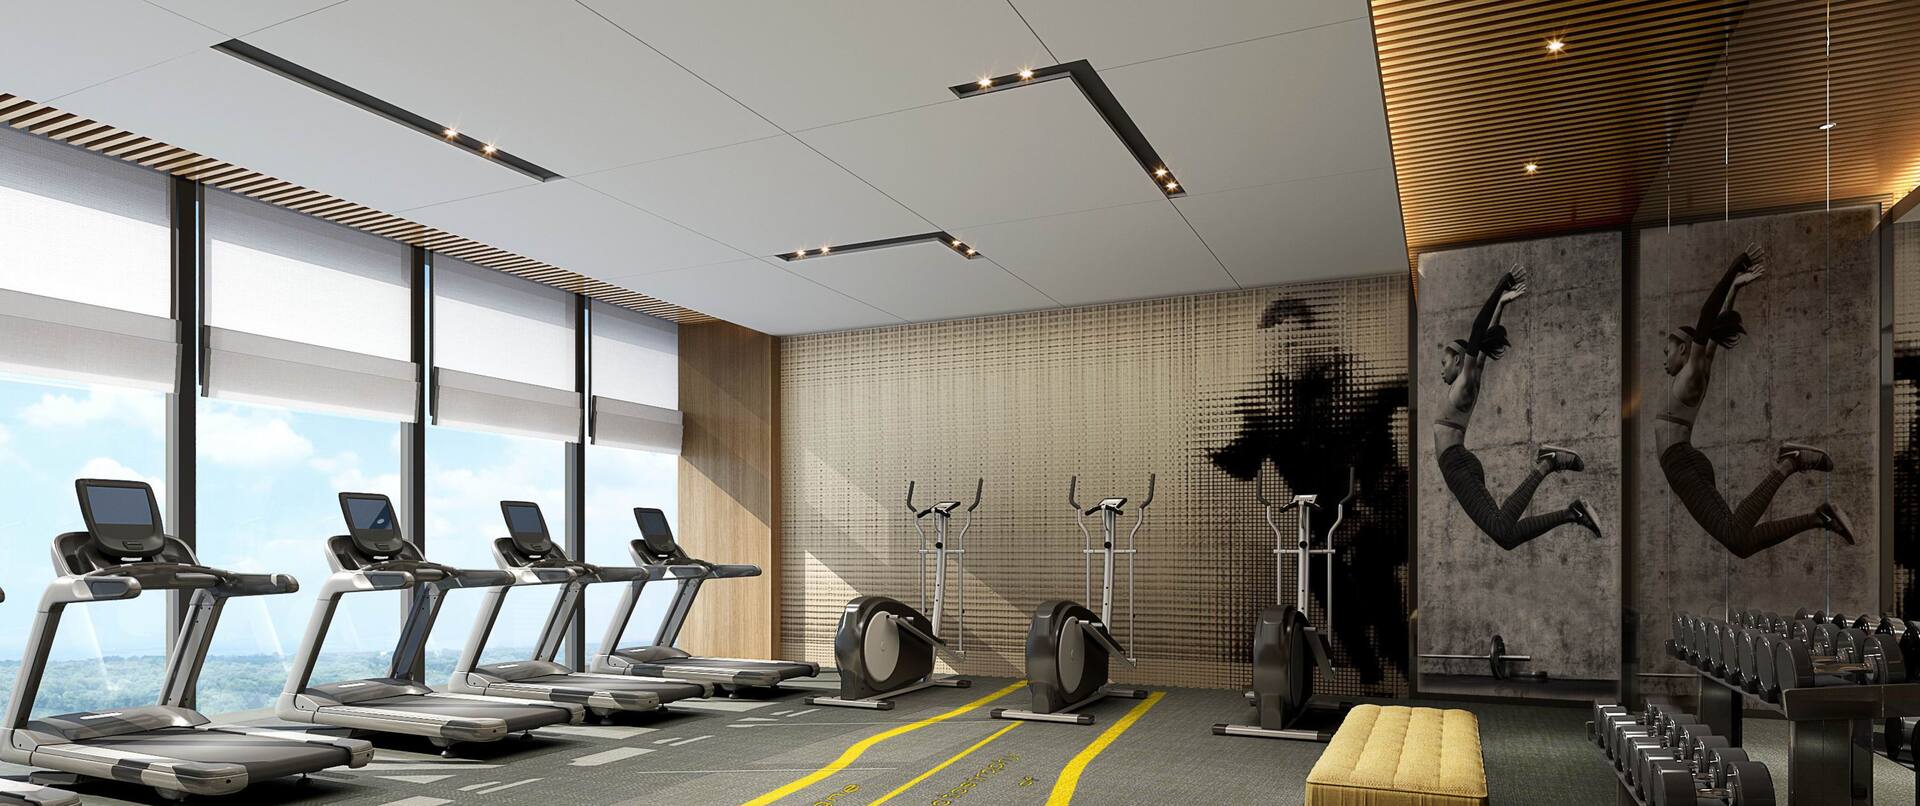 Gym With Fitness Equipment